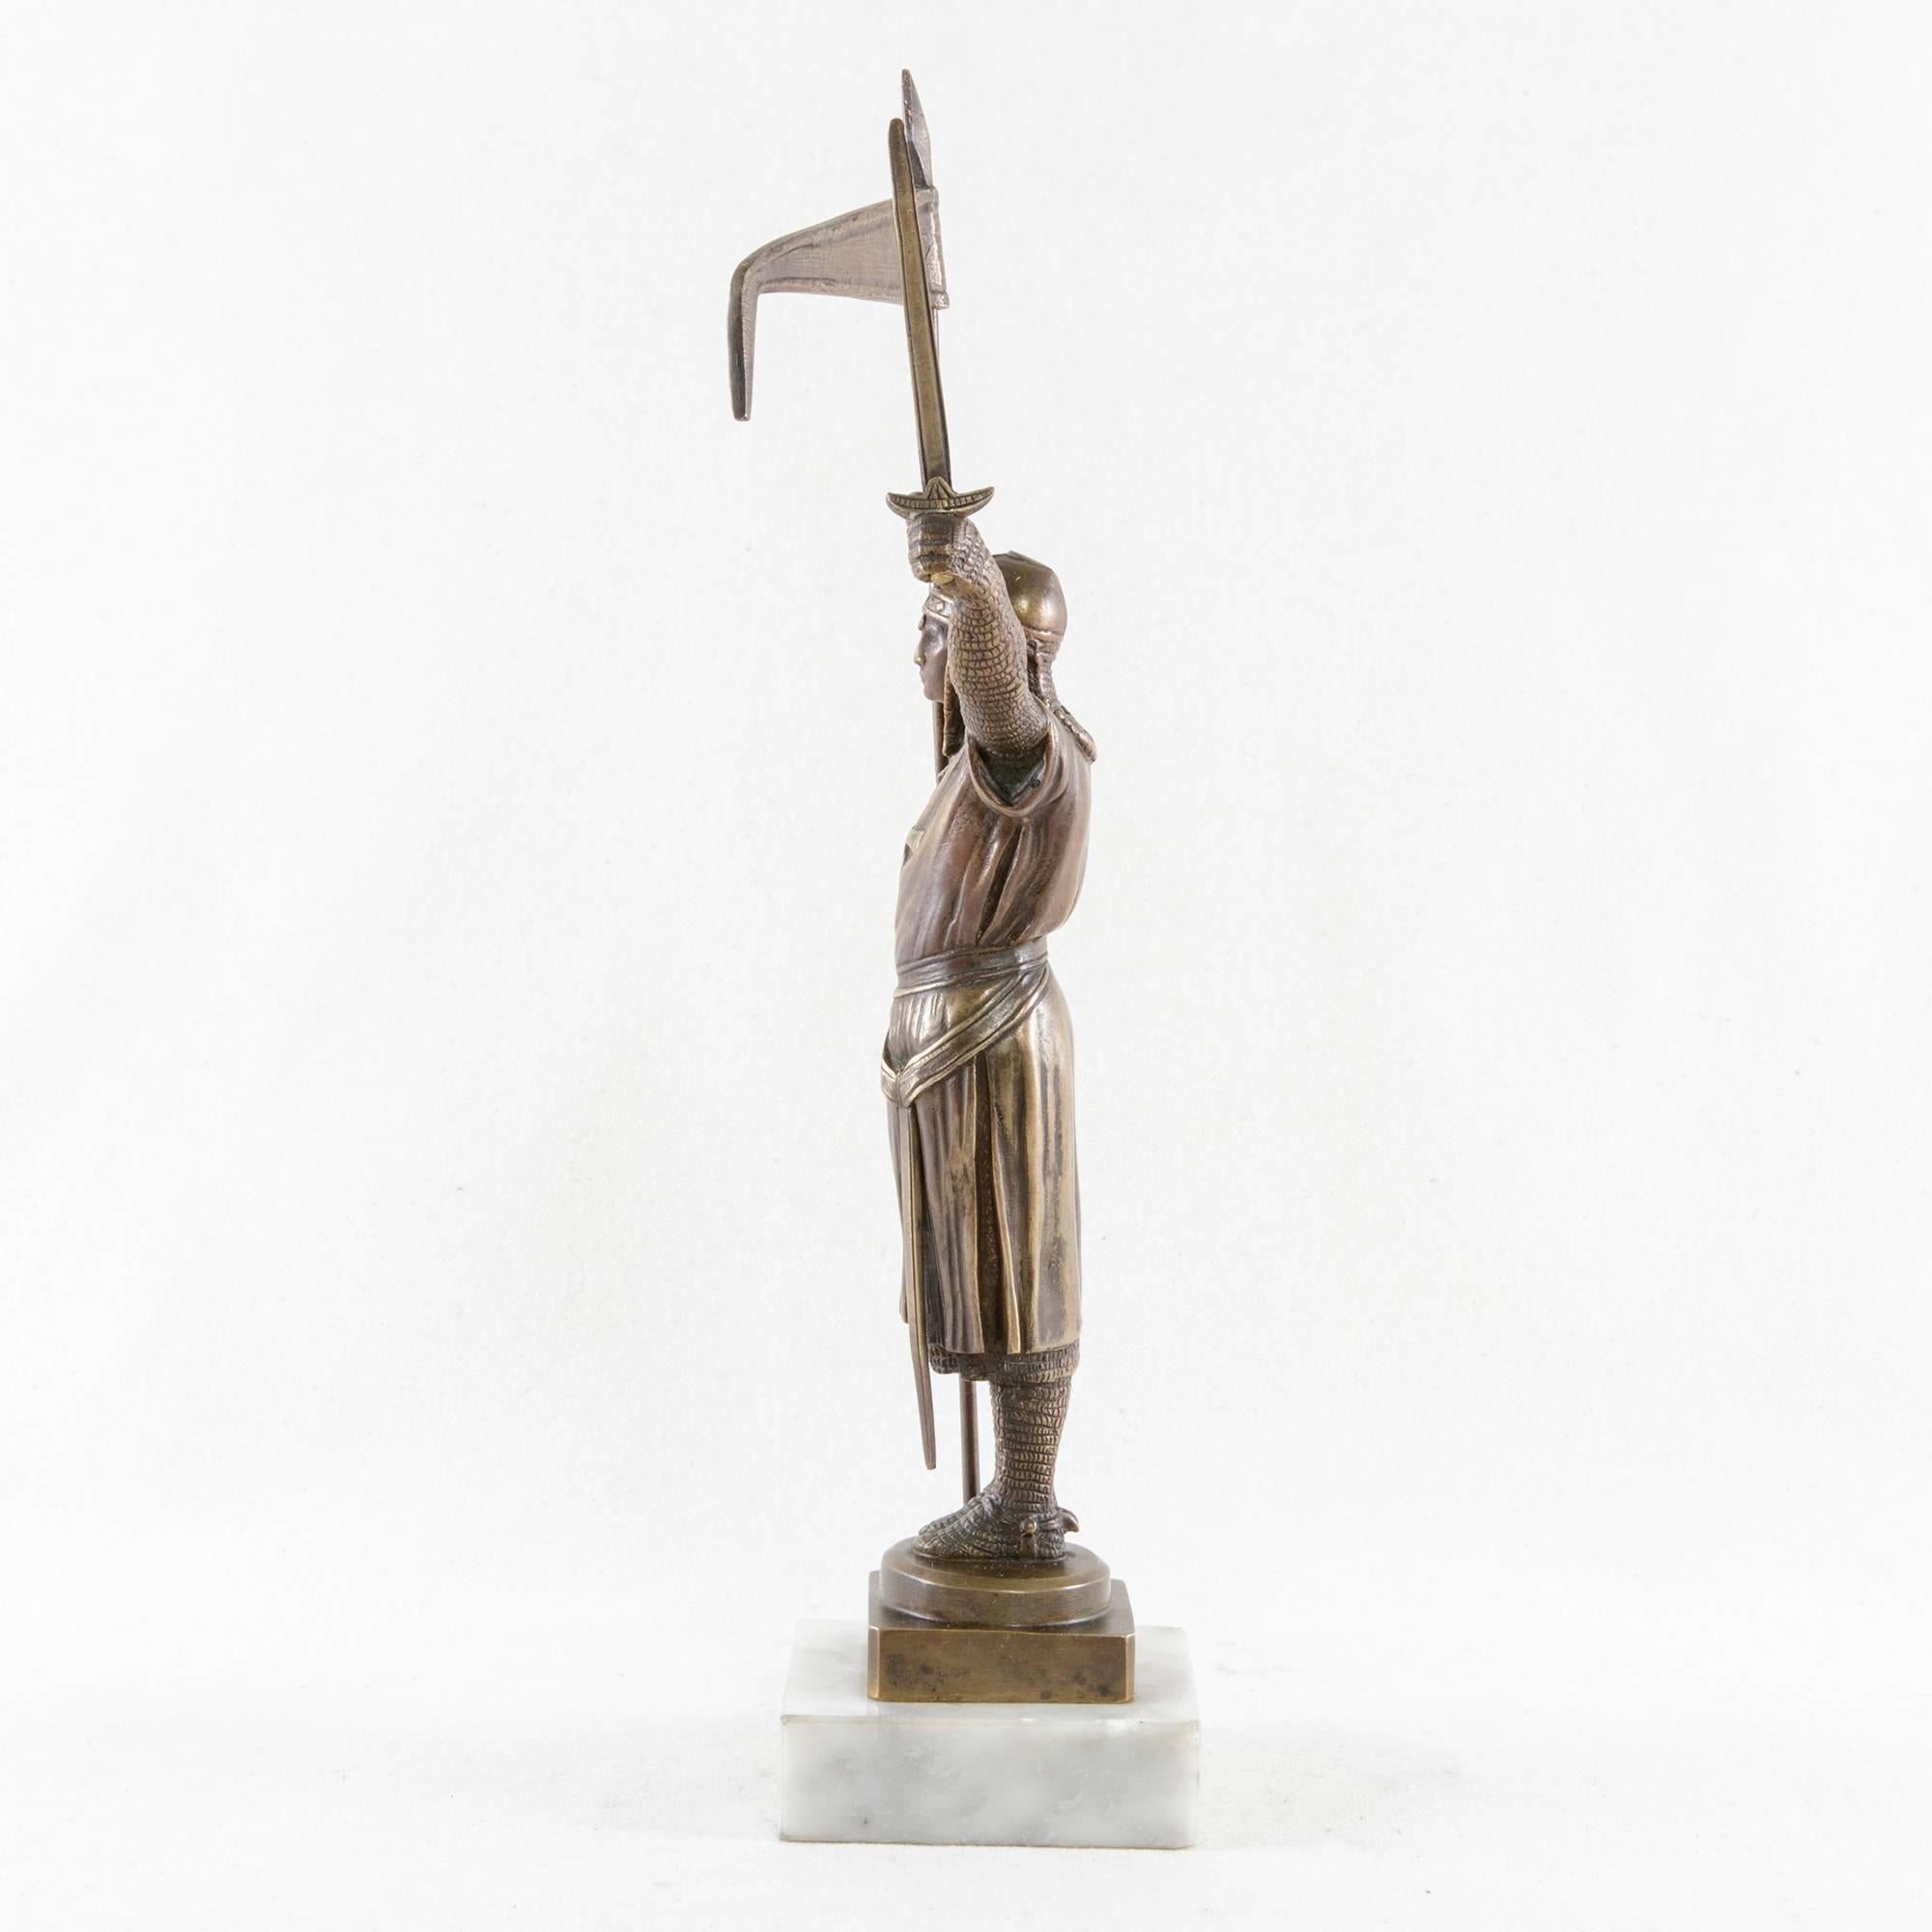 French Early 20th Century Art Deco Period Bronze Statue of a Knight Templar with Flag